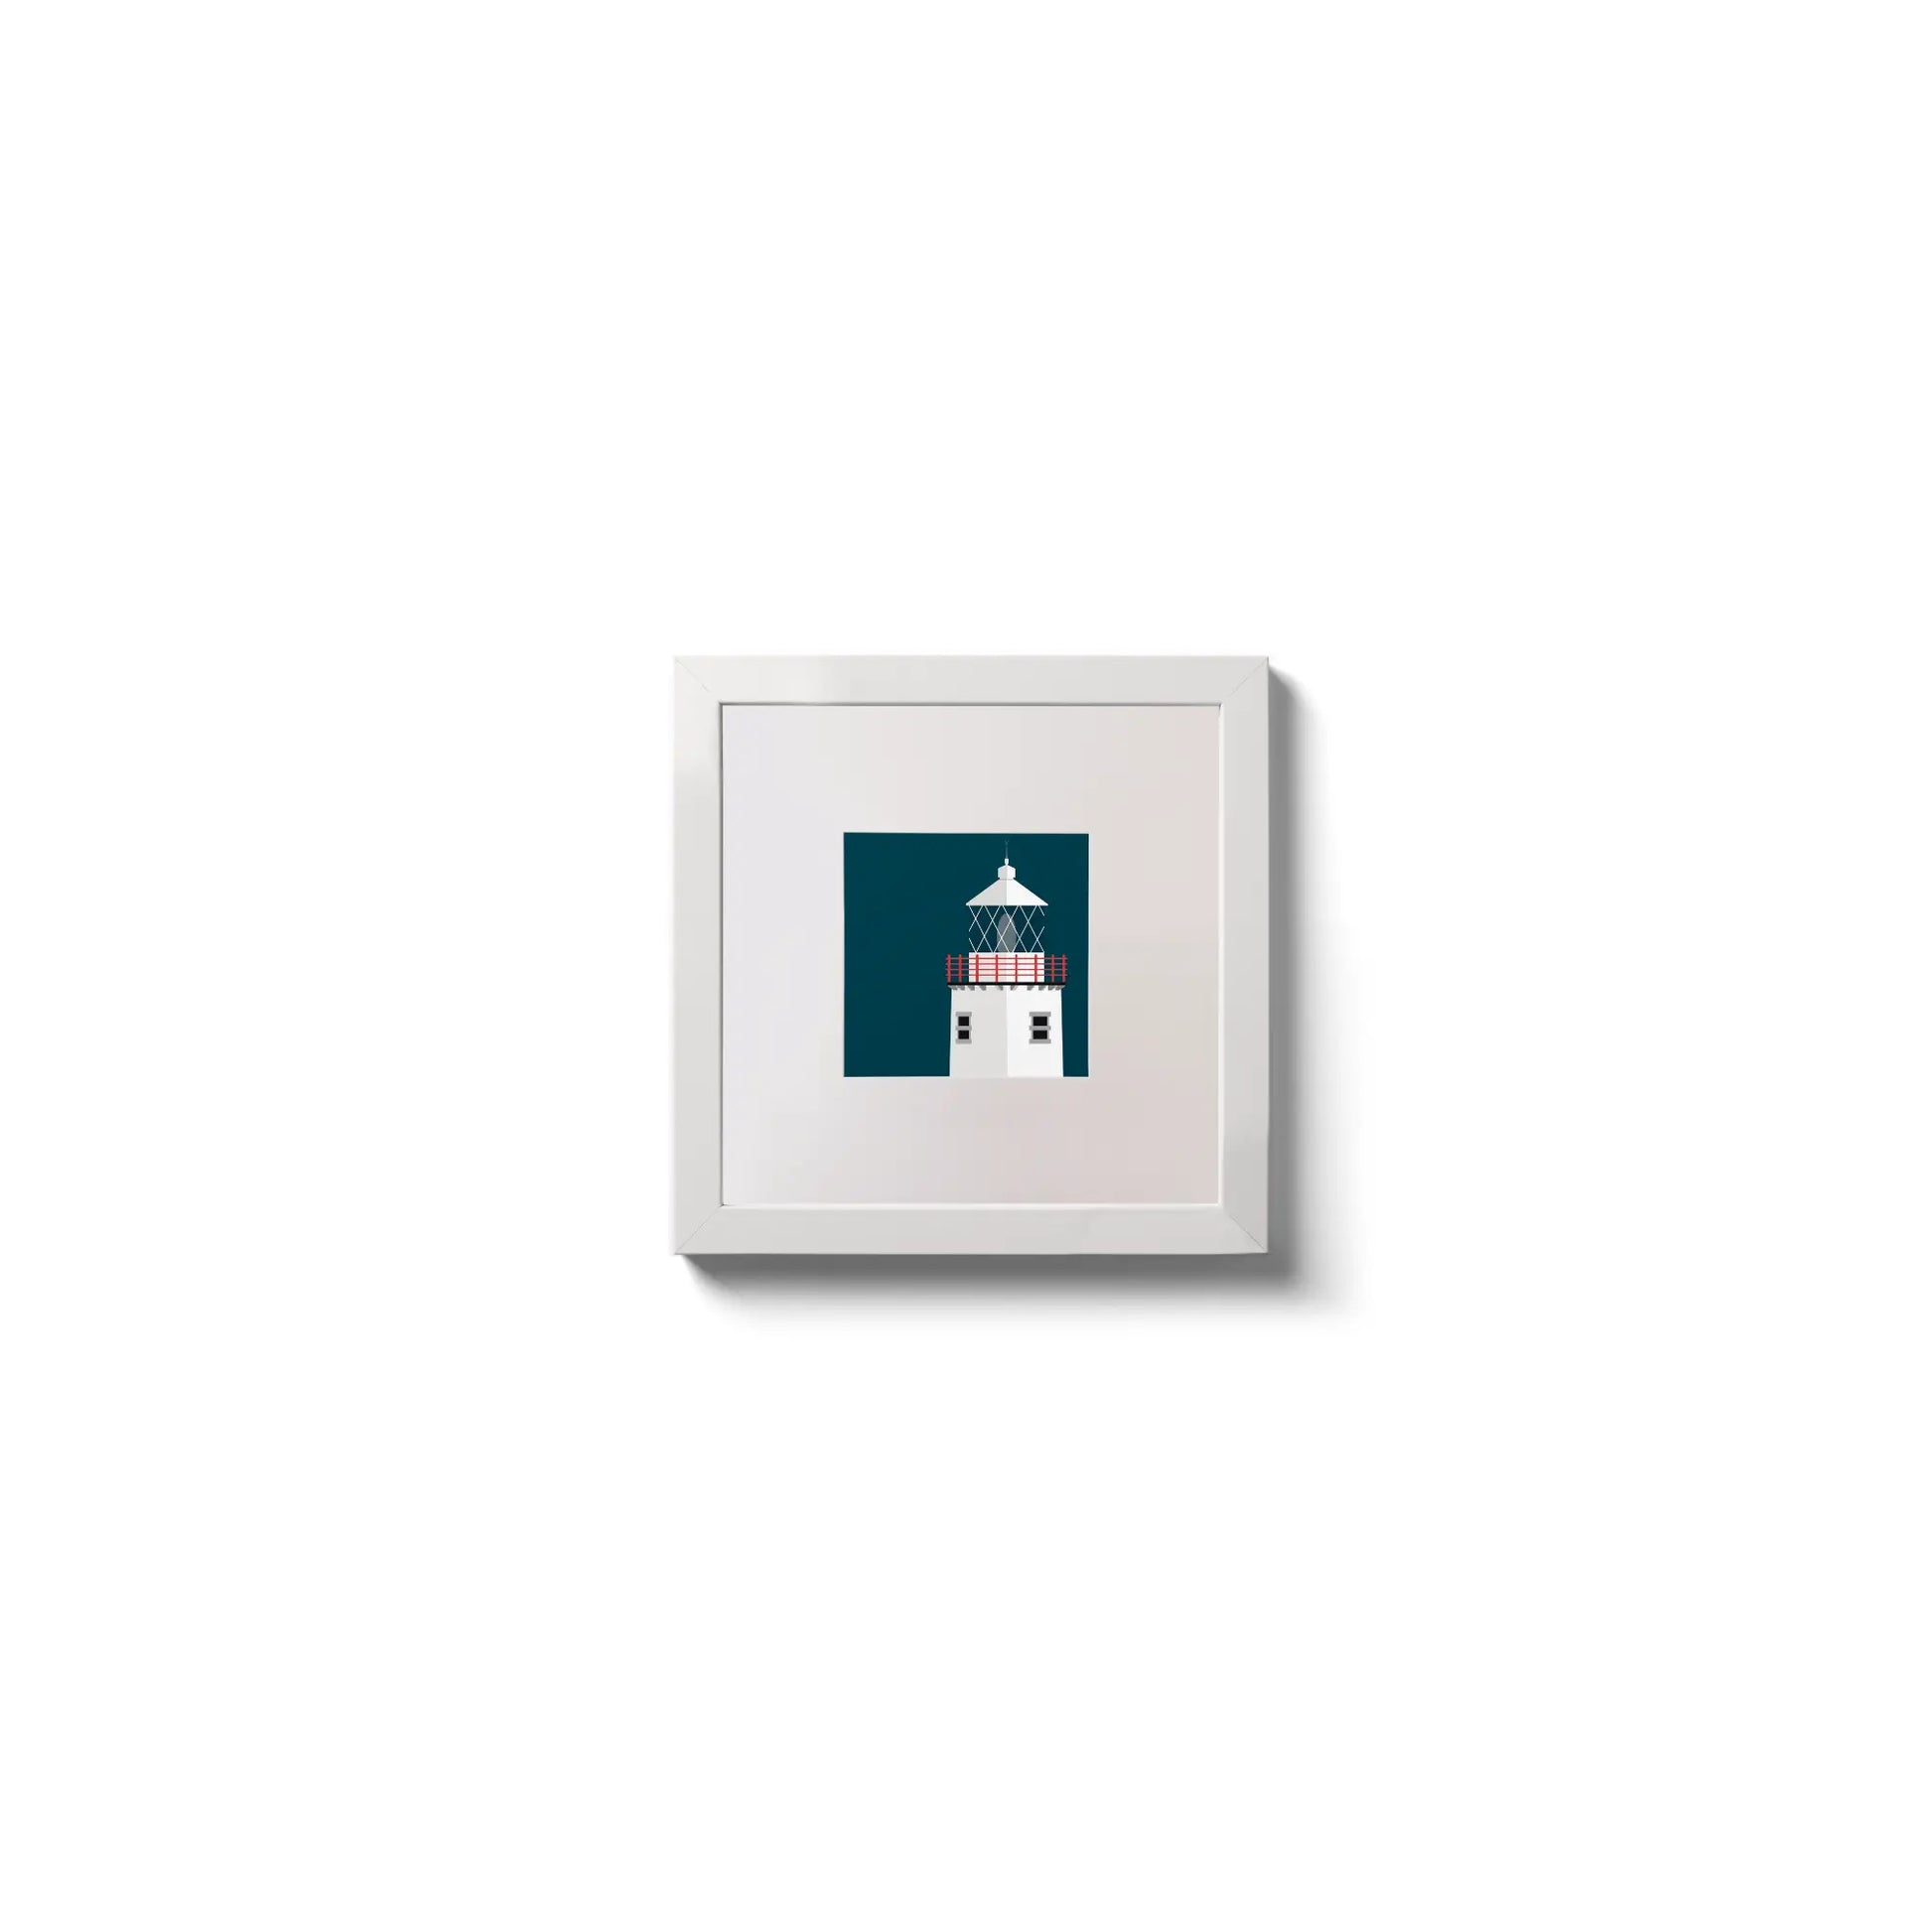 Illustration of Fanad Head lighthouse on a midnight blue background,  in a white square frame measuring 10x10cm.